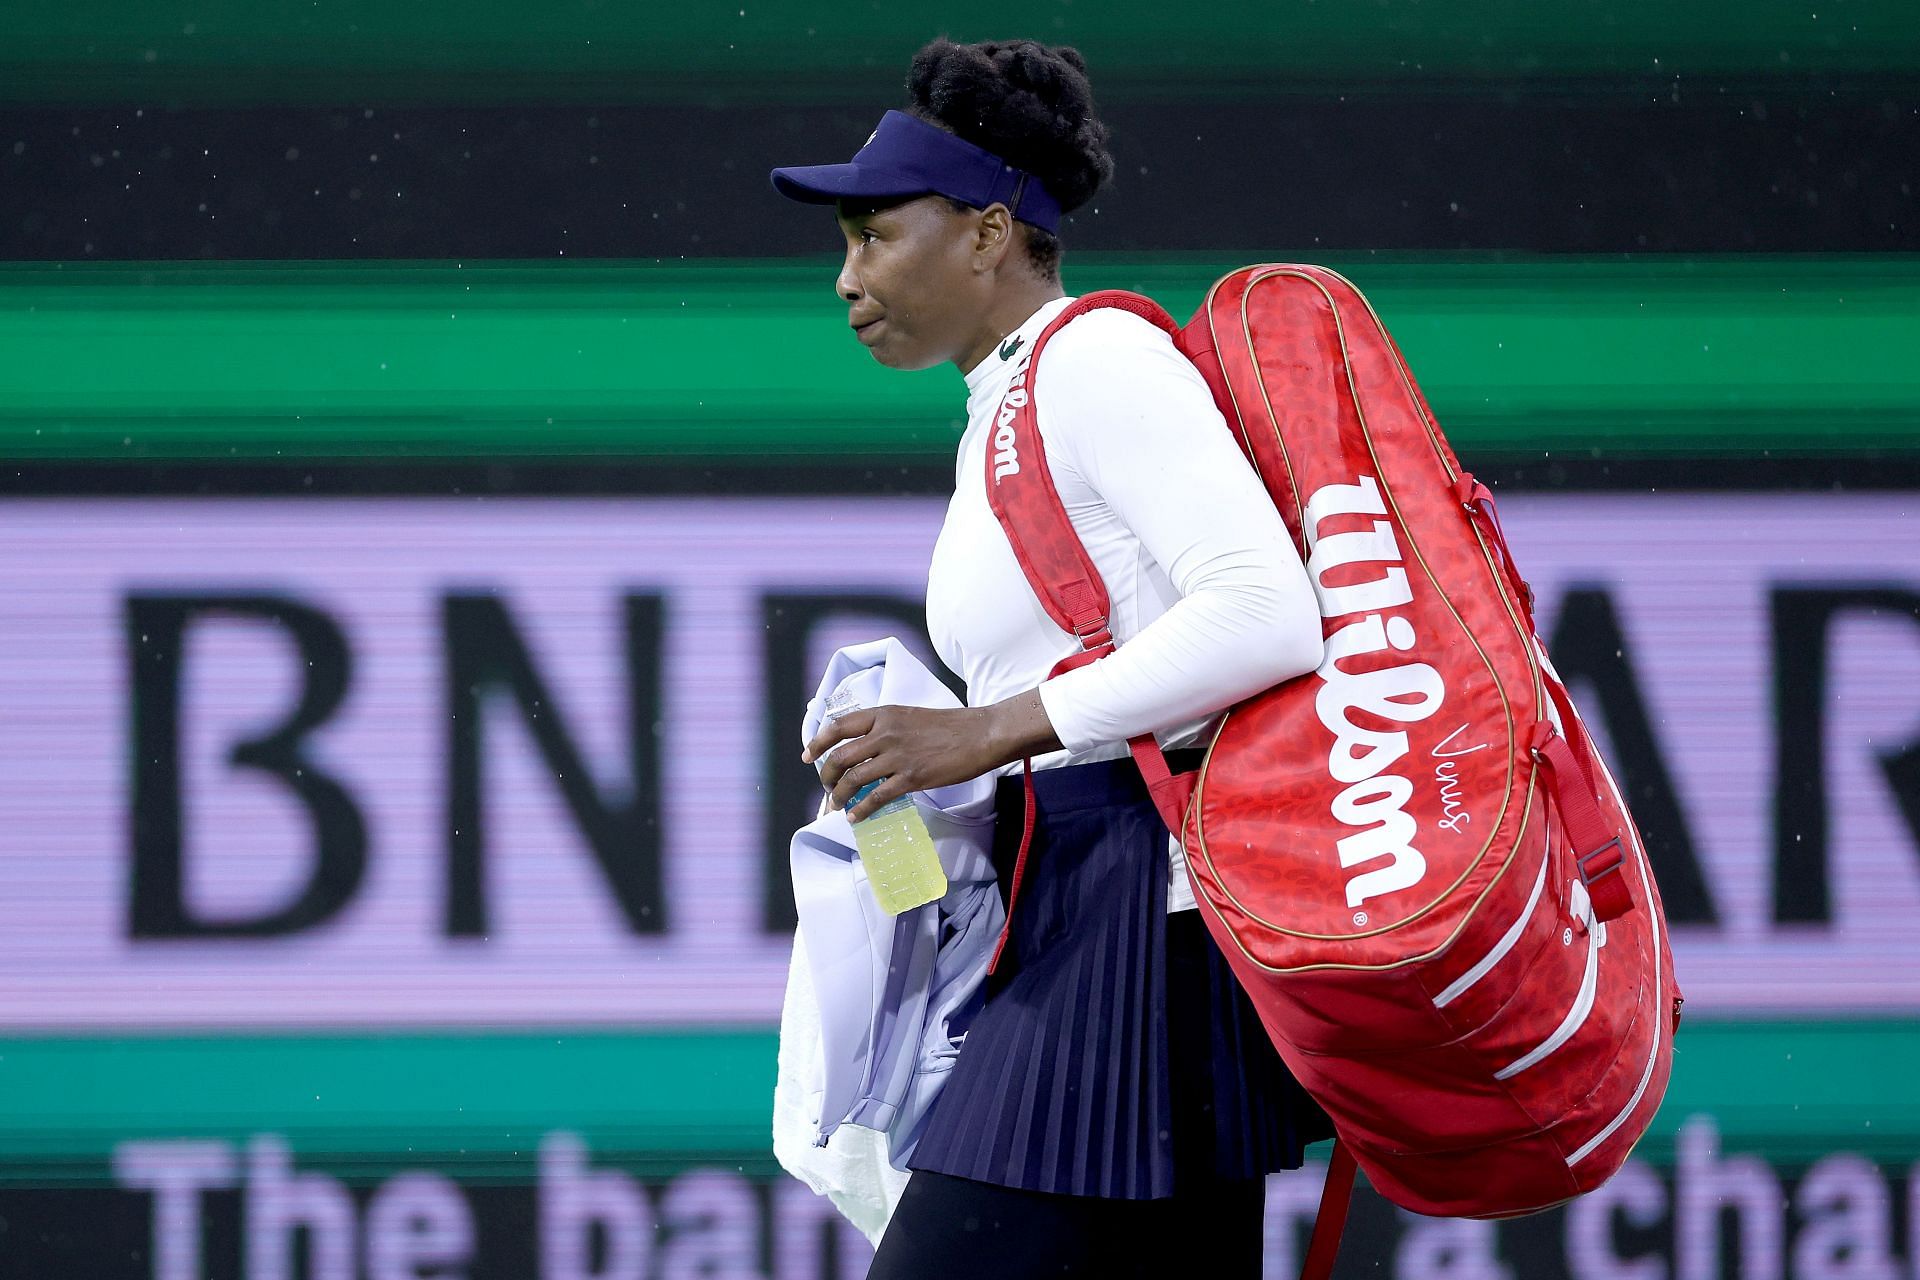 Venus Williams leaves after her match is suspended